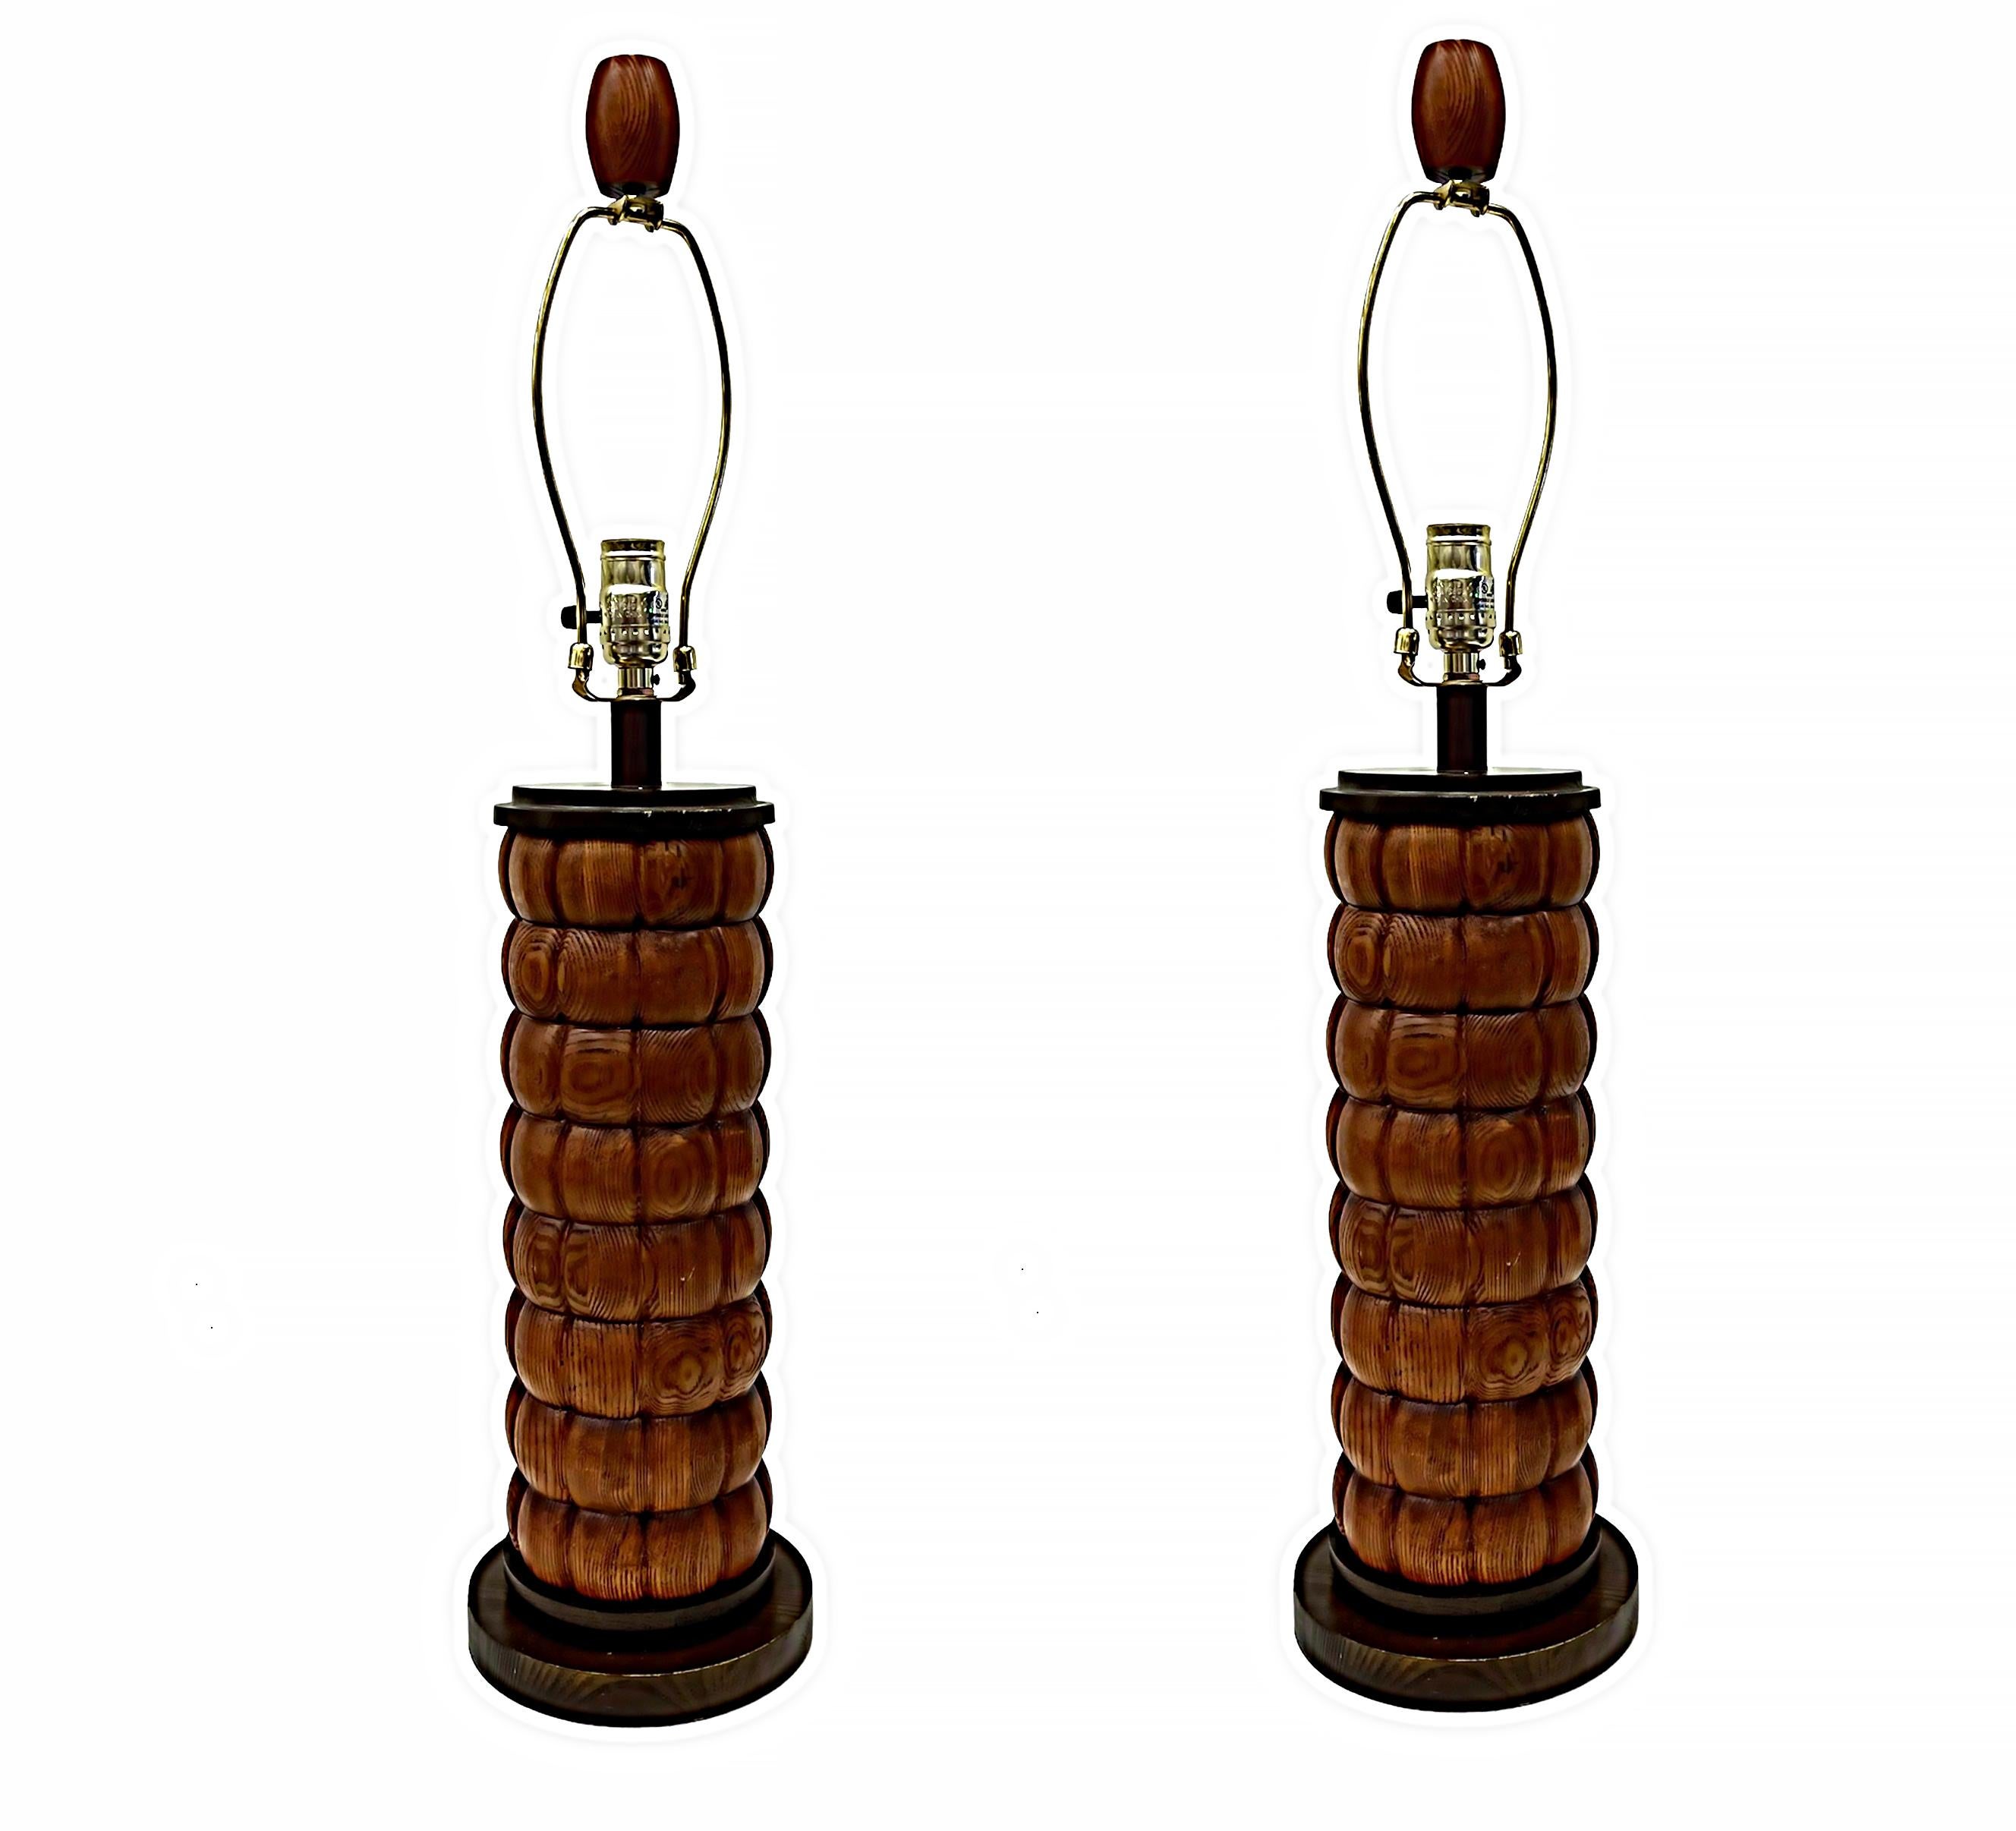 Carved Mid-Century Modernist Wood Table Lamps with New Shades, Pair For Sale